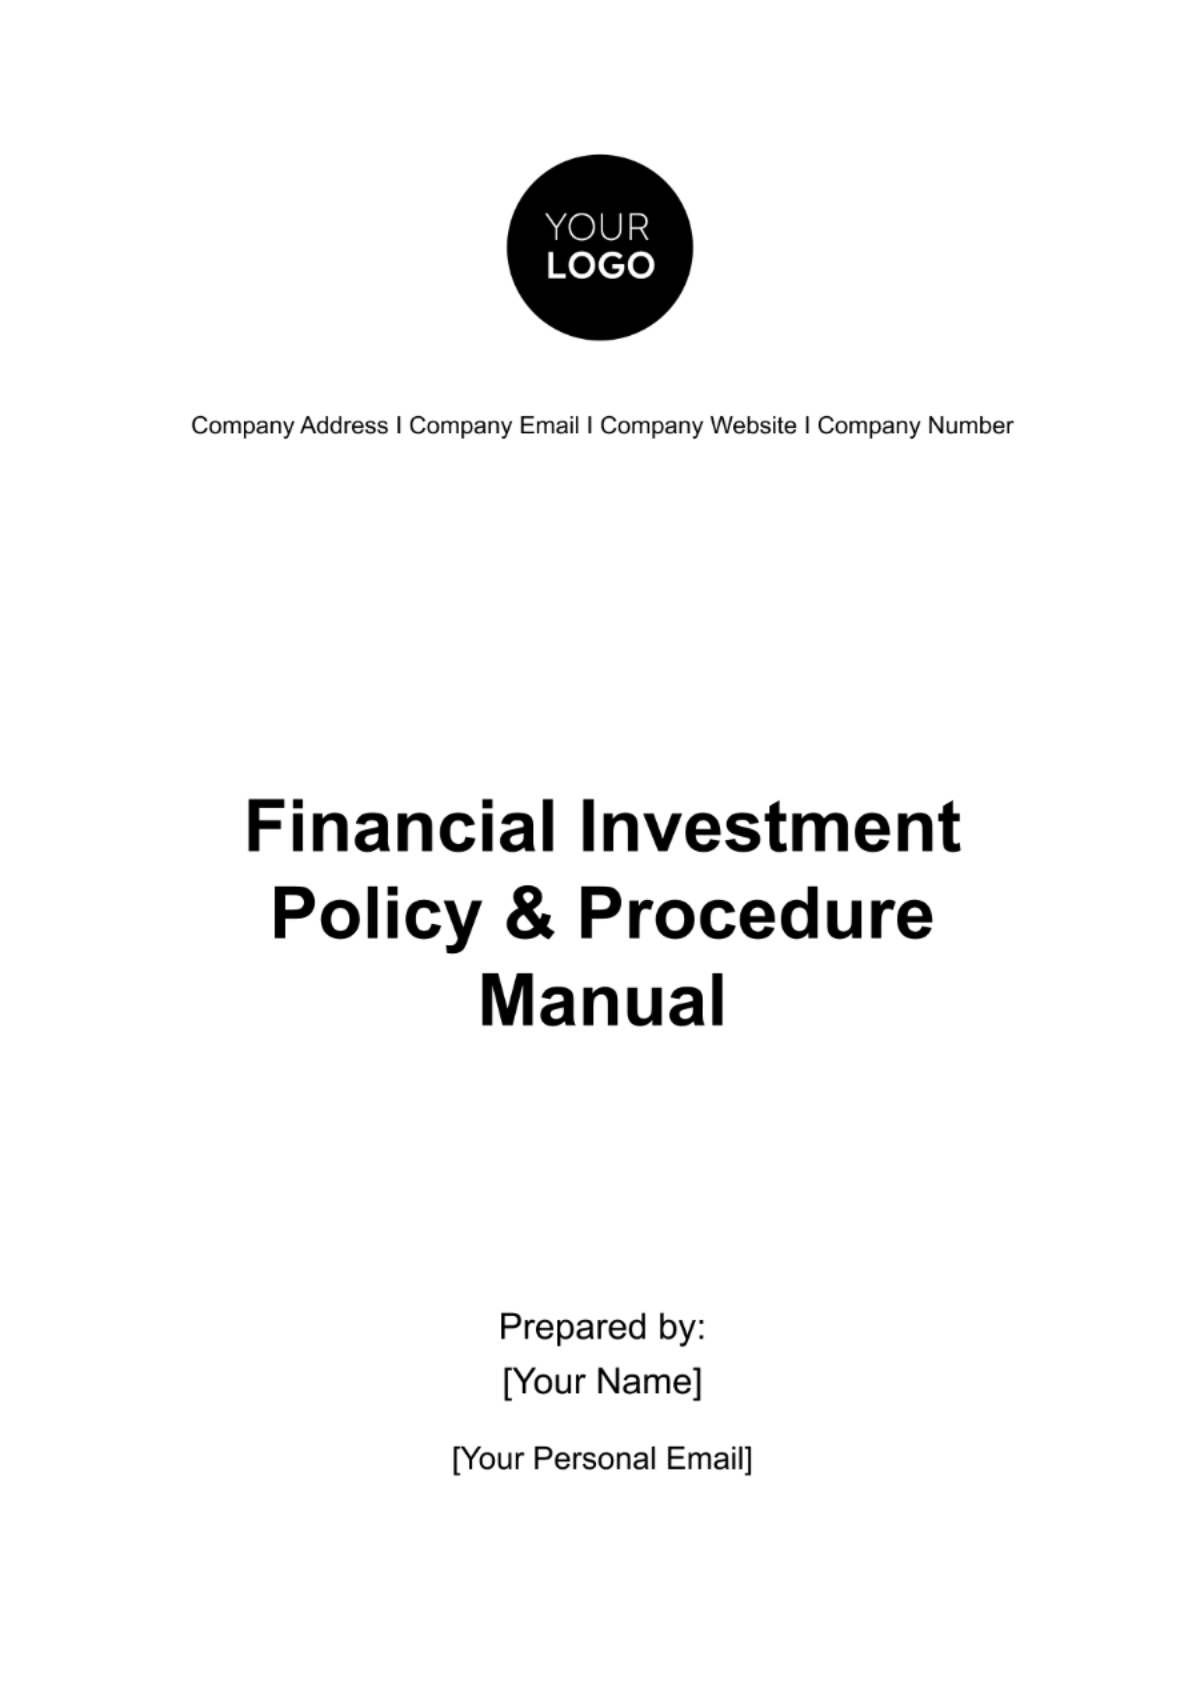 Free Financial Investment Policy & Procedure Manual Template